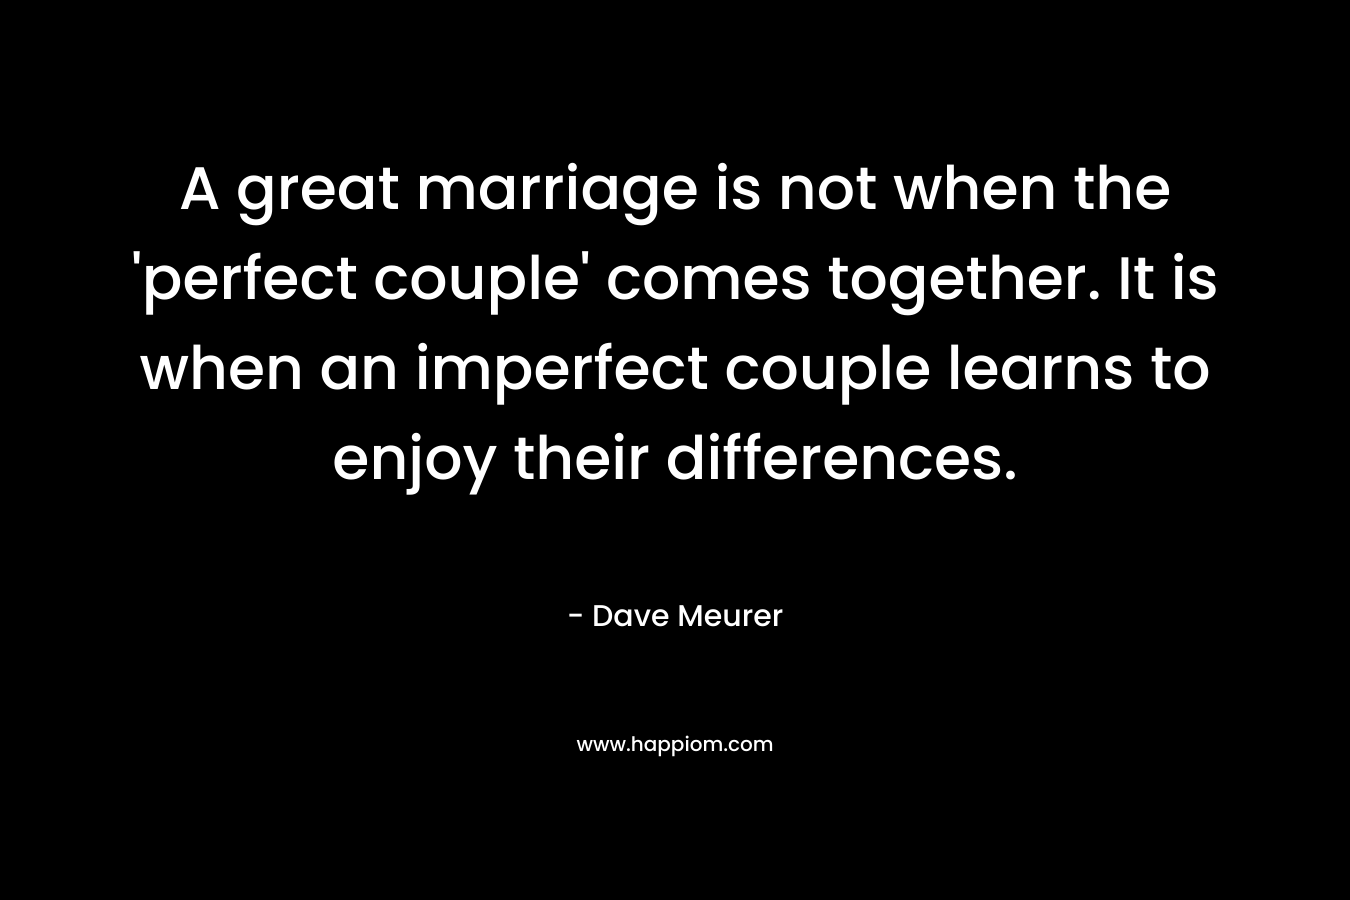 A great marriage is not when the 'perfect couple' comes together. It is when an imperfect couple learns to enjoy their differences.